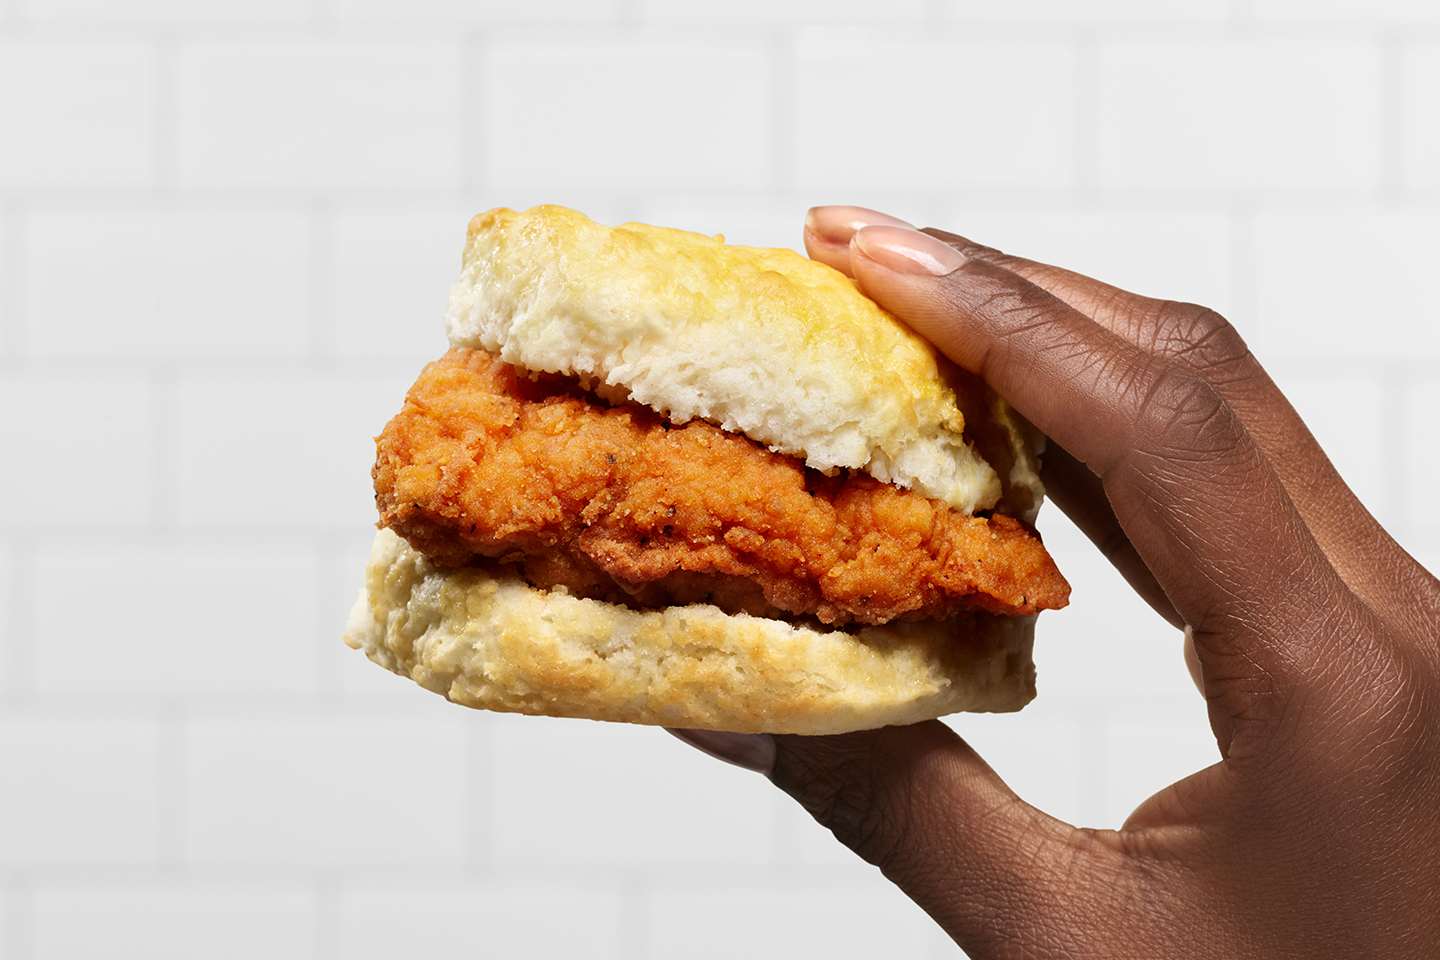 Customer holding the Chick-fil-A Spicy Chicken Biscuit